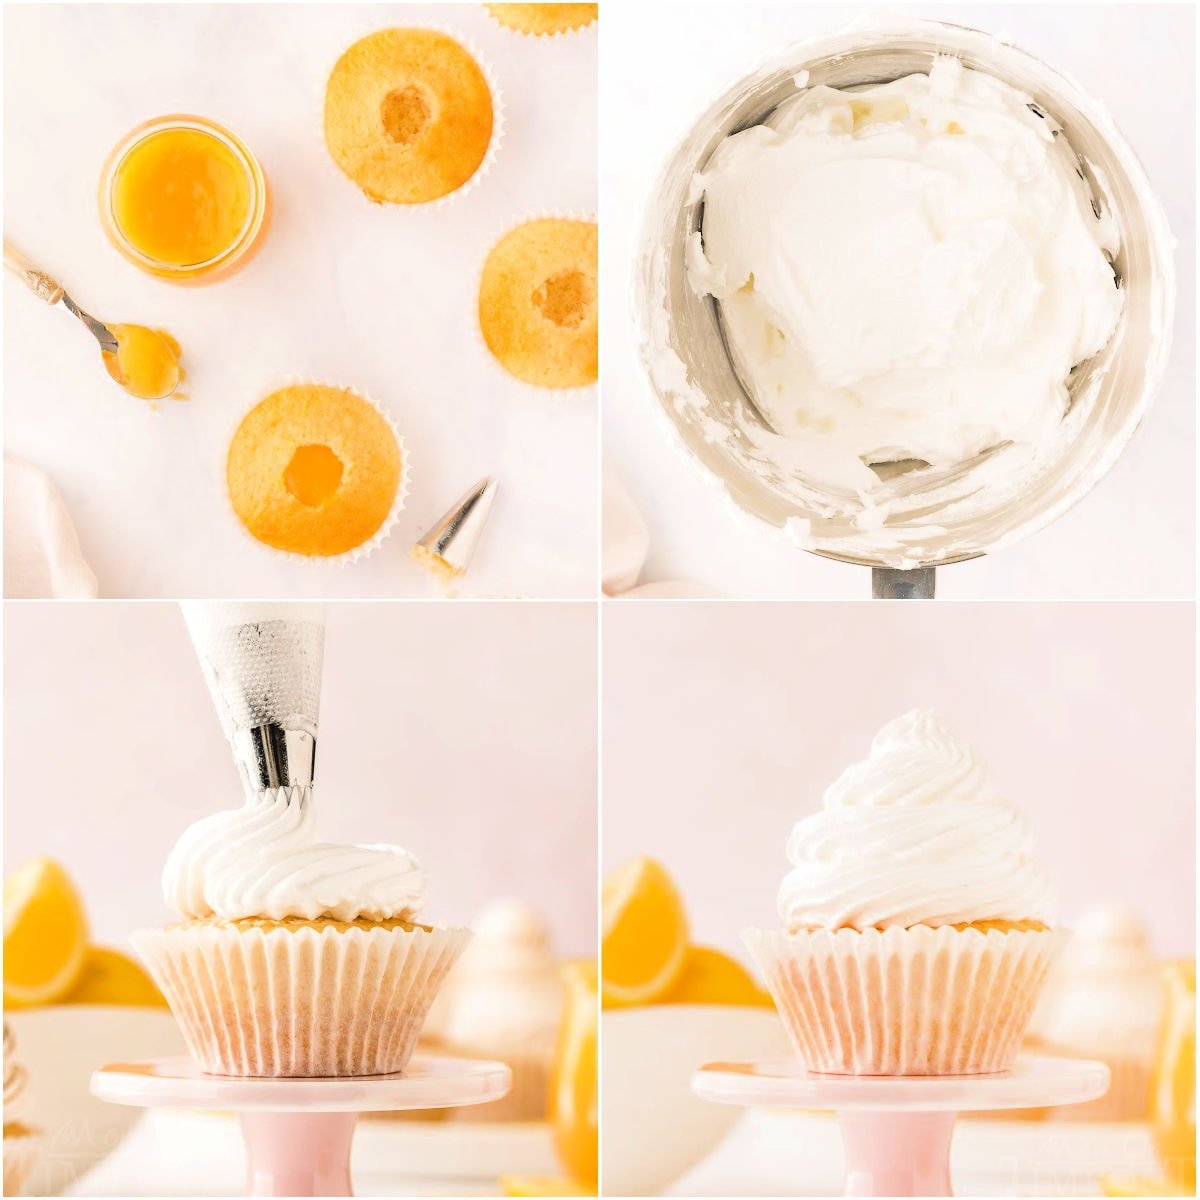 four image collage showing how to assemble the cupcakes including making a hole for the lemon curd and piping on the meringue.